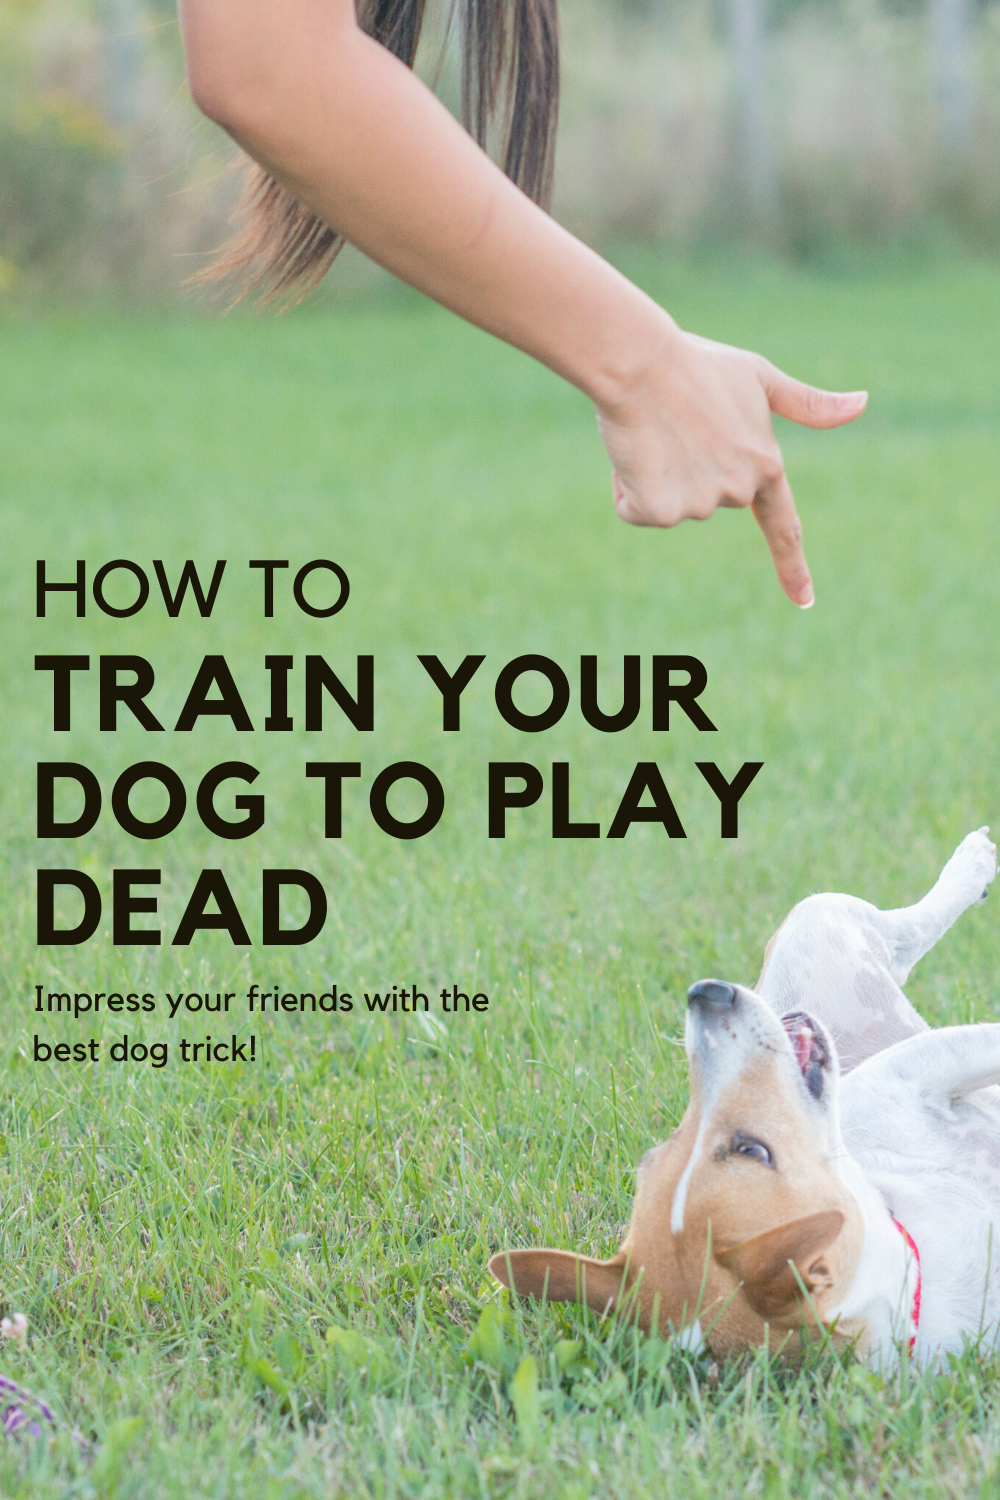 Train your dog to play dead